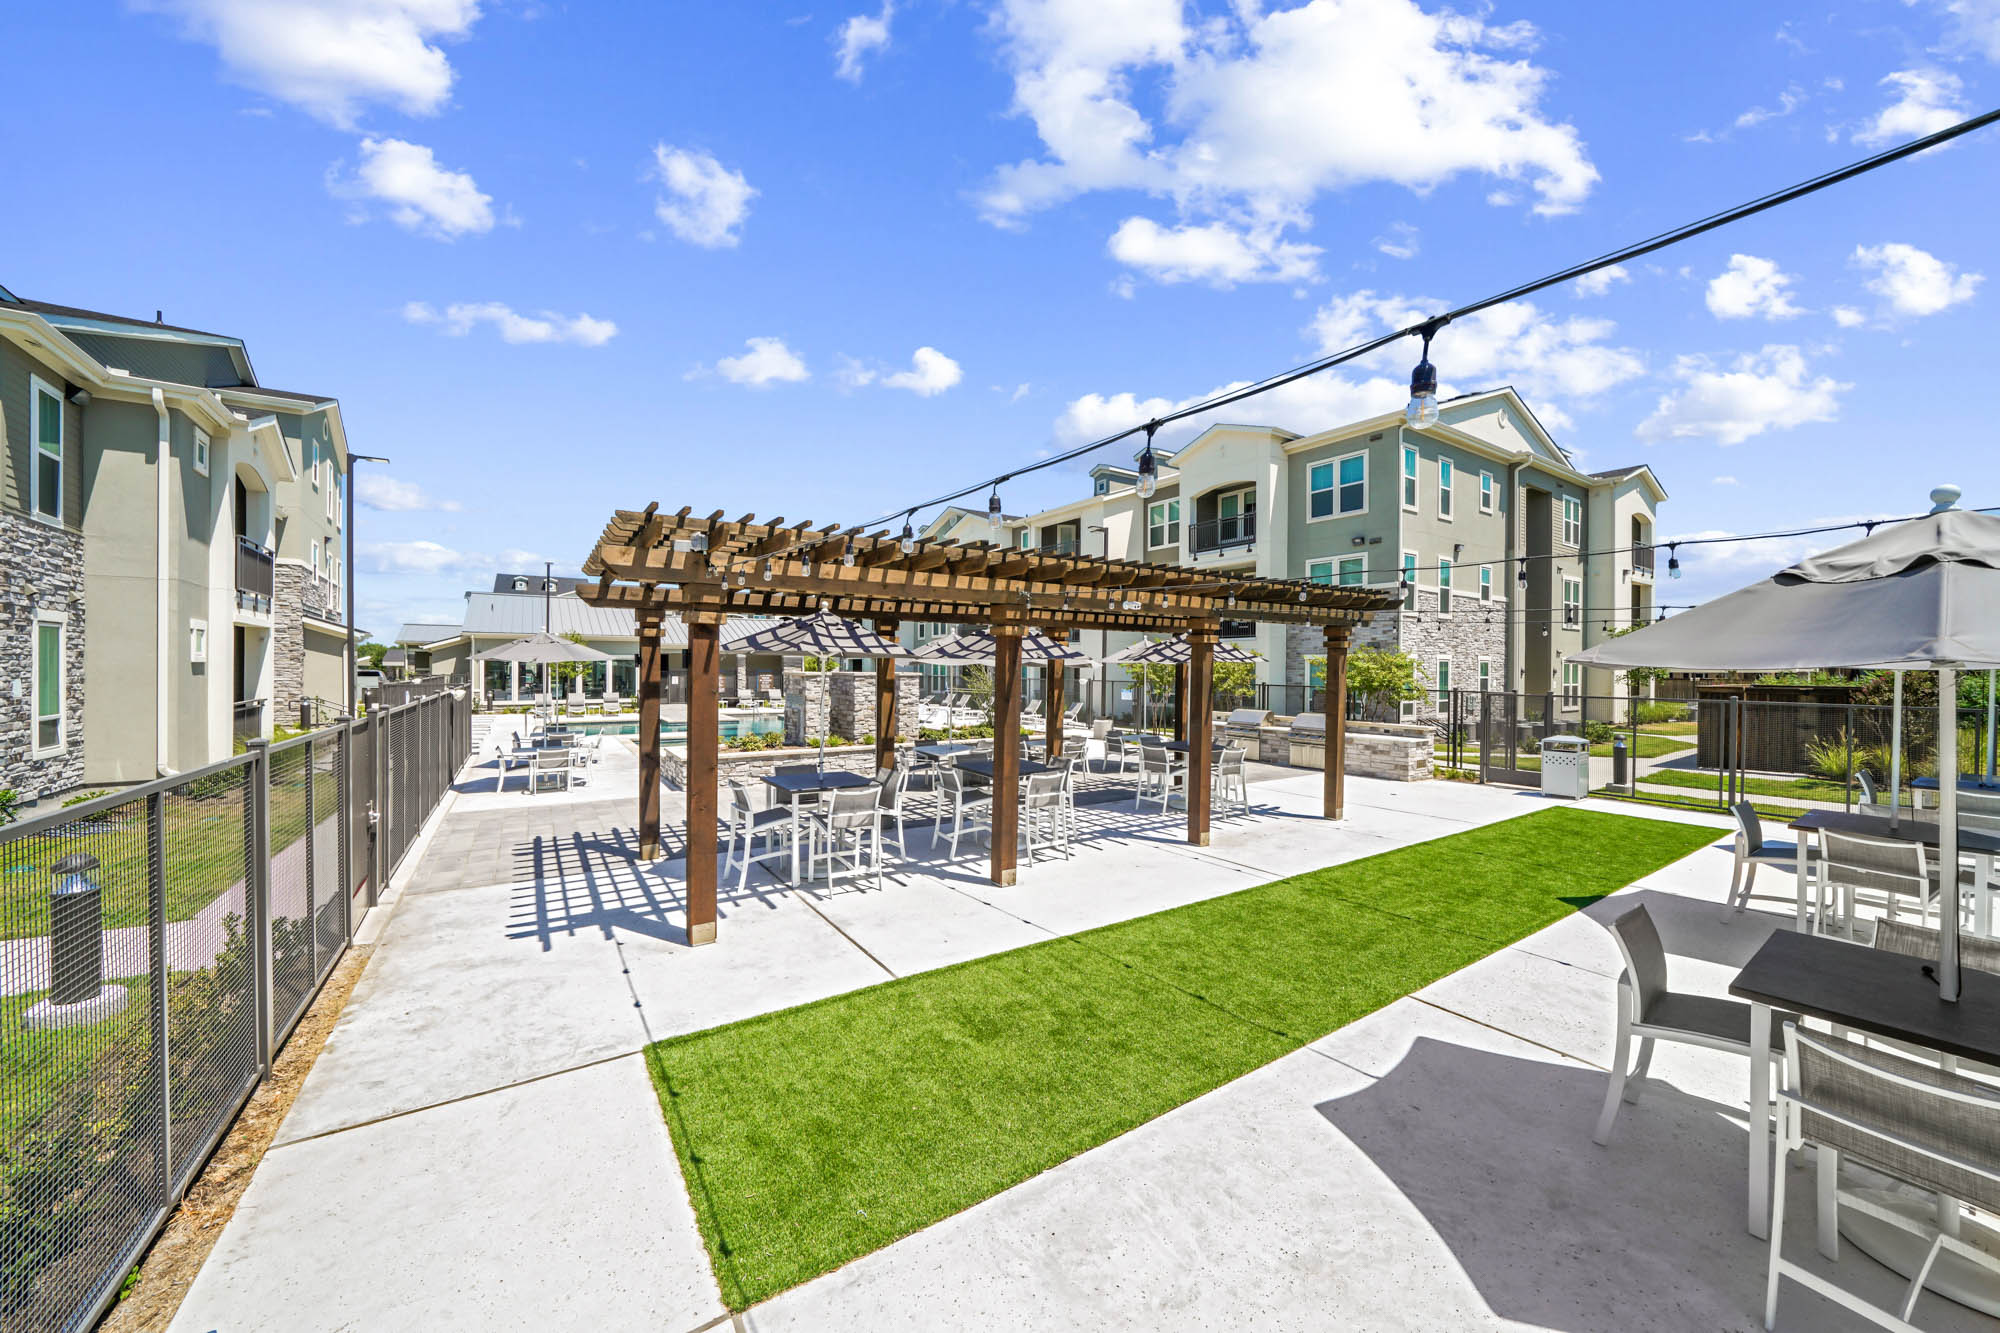 The outdoor terrace at Embree Hill apartments in Dallas, TX.